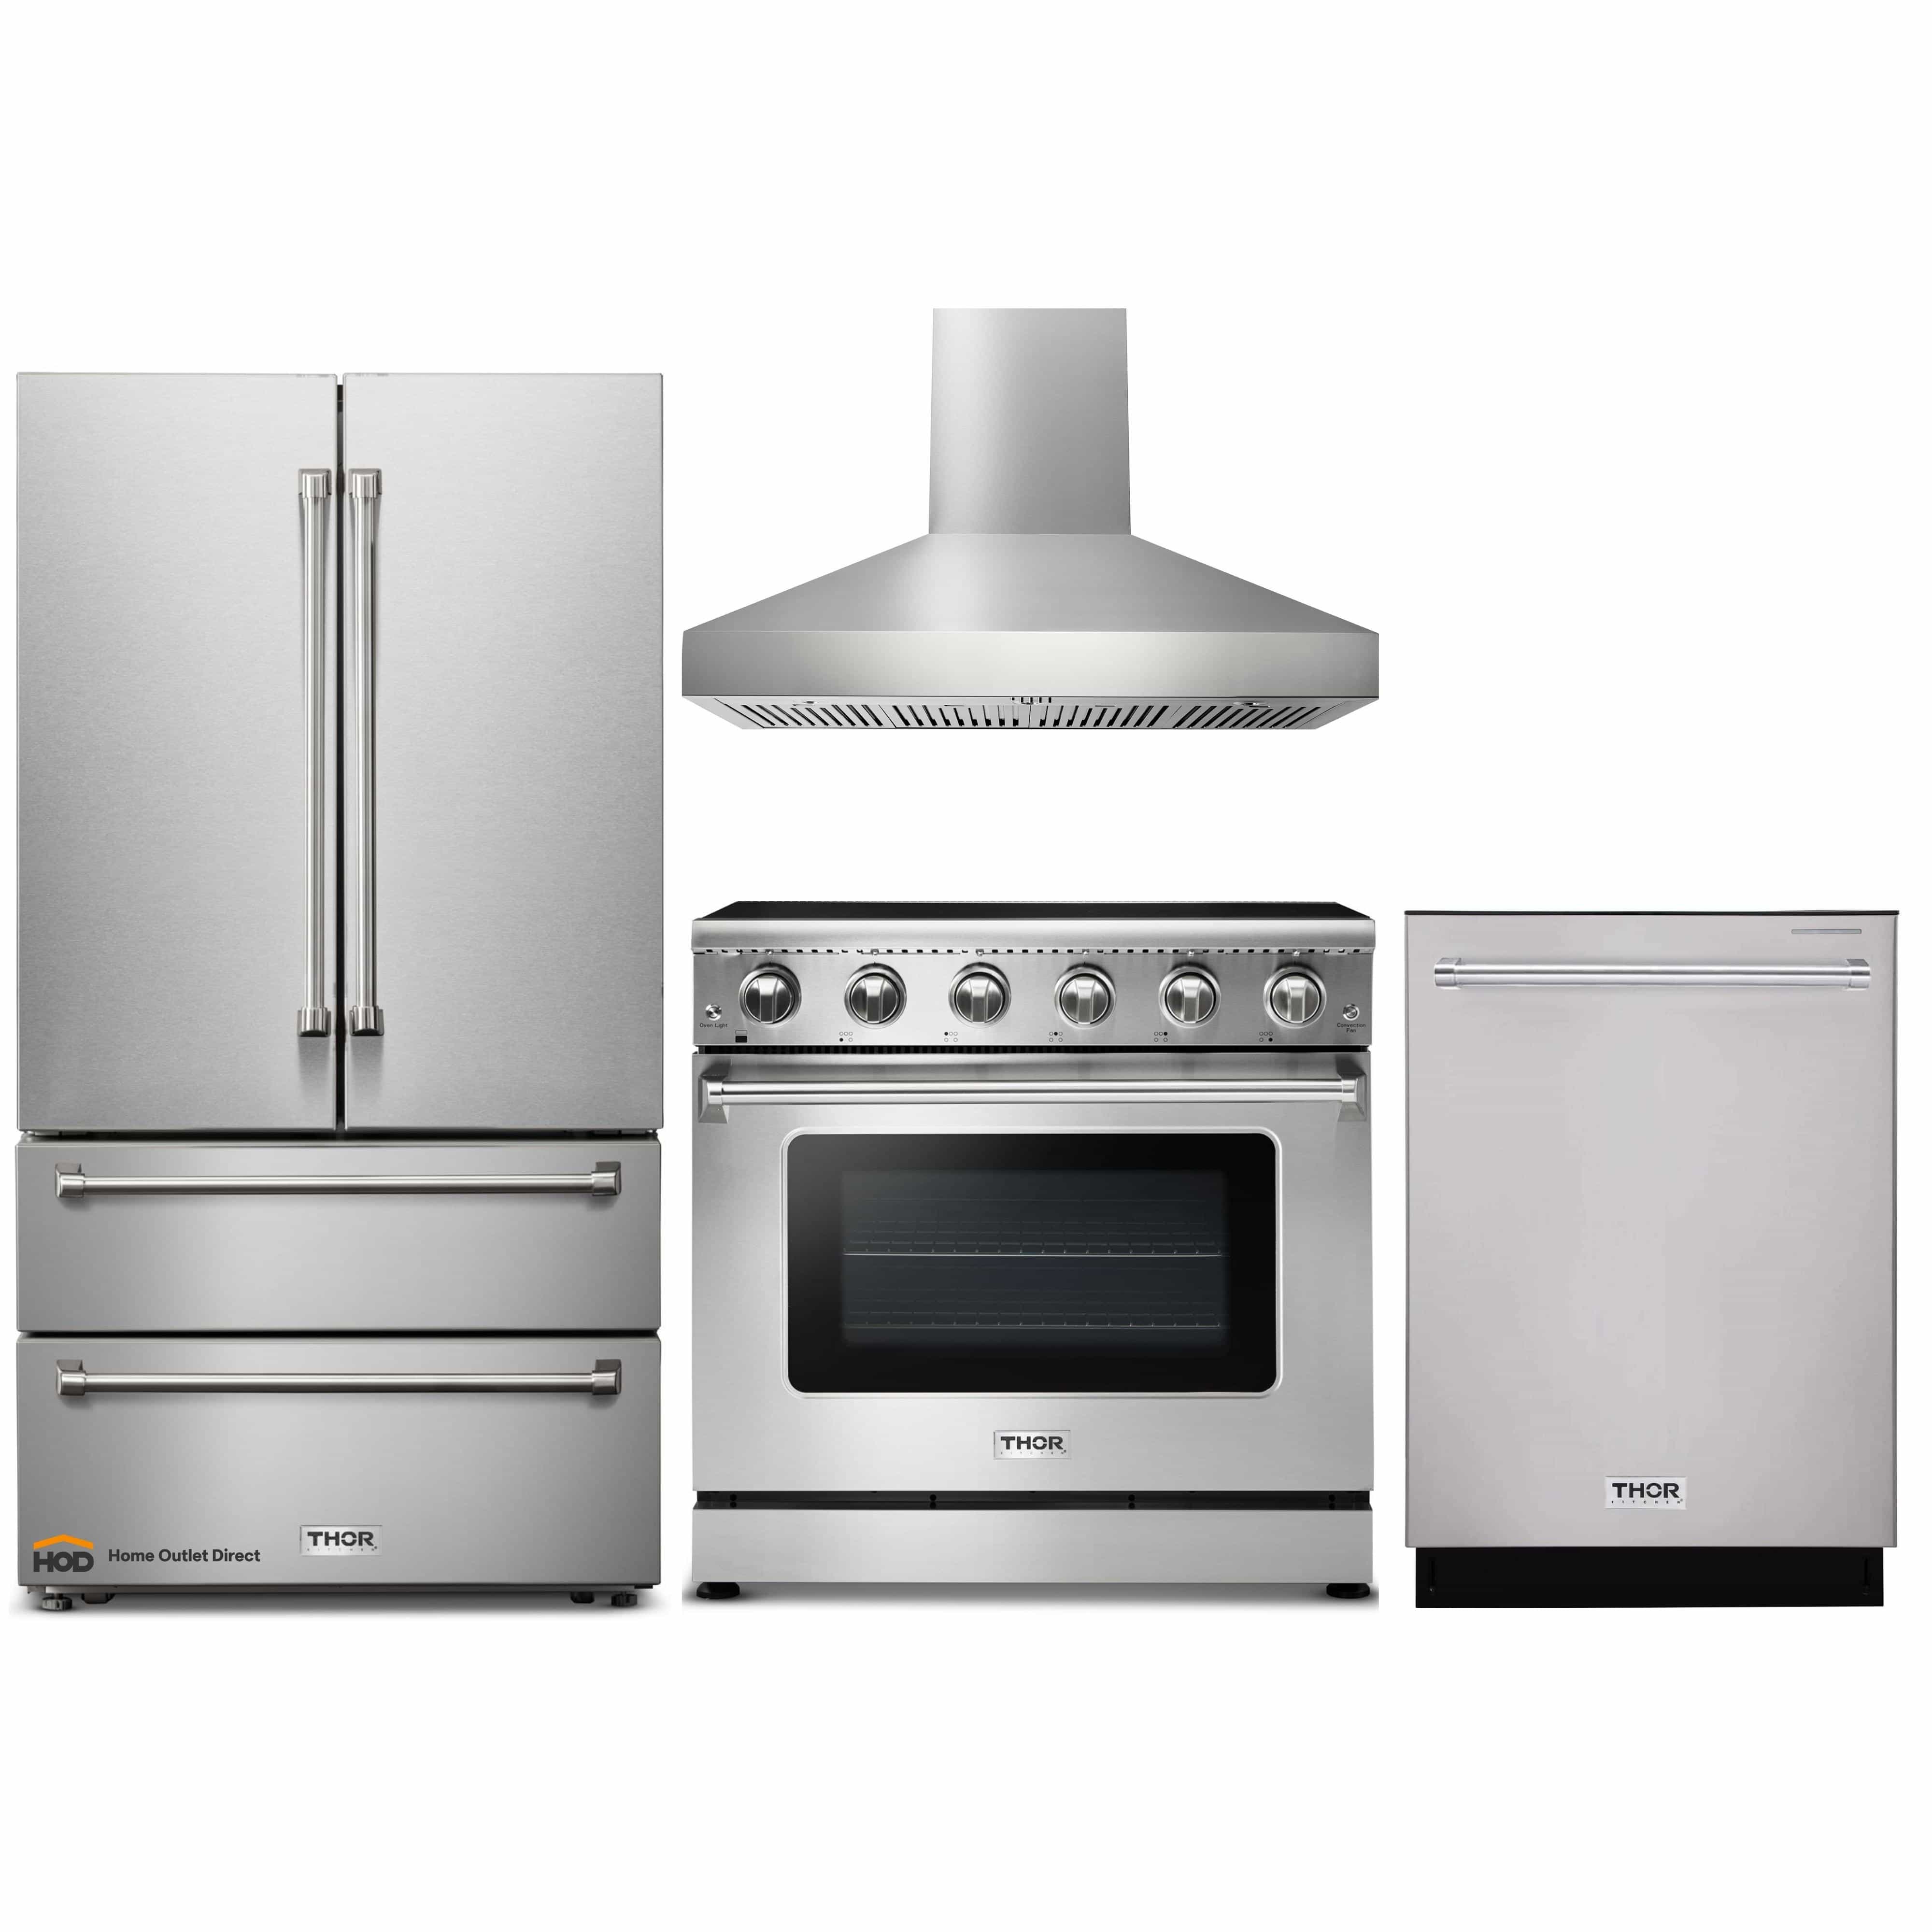 Thor Kitchen 4-Piece Appliance Package - 36-Inch Electric Range, French Door Refrigerator, Pro-Style Wall Mount Hood, and Dishwasher in Stainless Steel